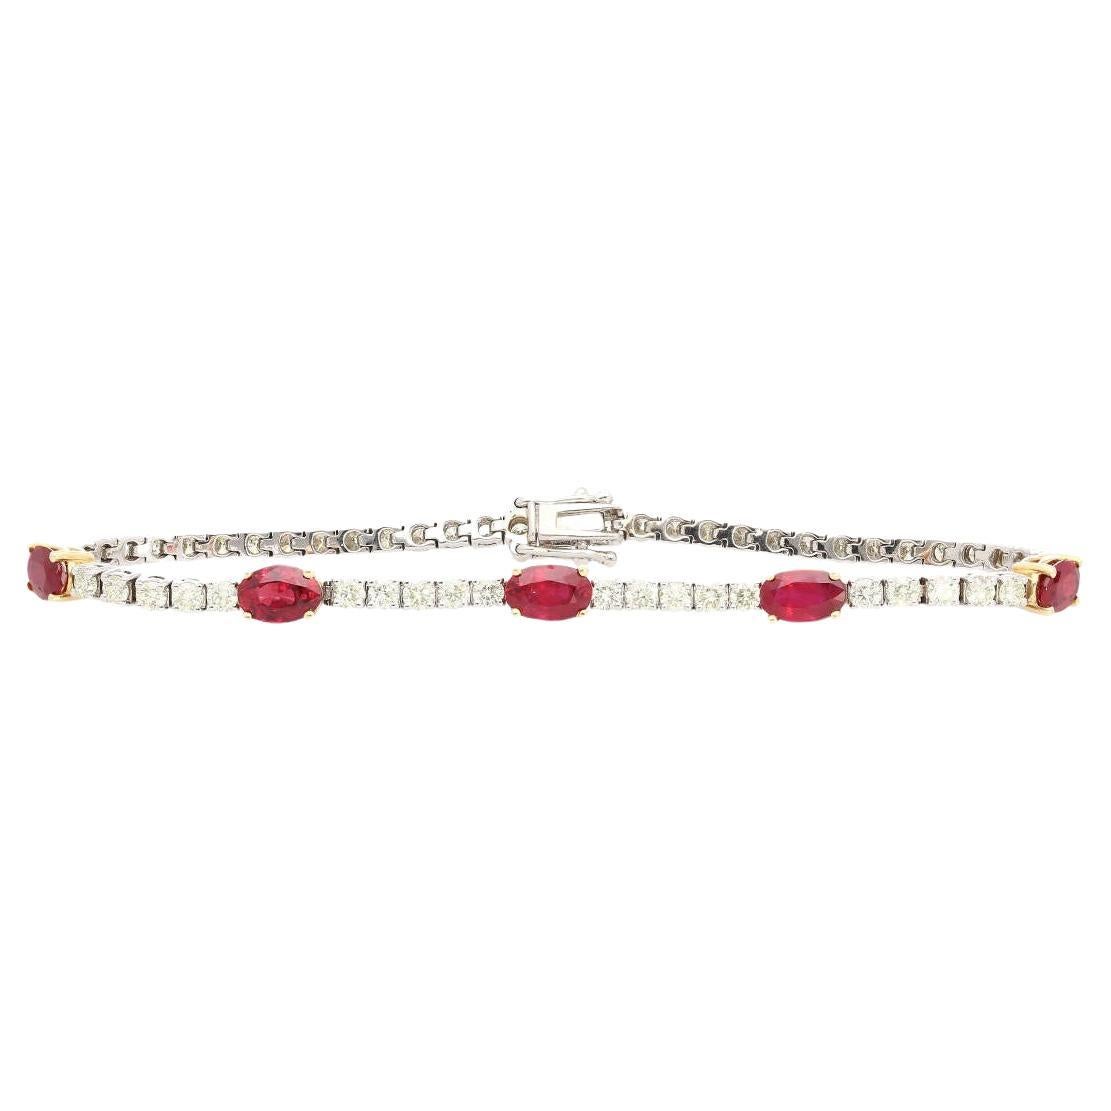 Natural 2.80 carat Ruby and 2.33 carat Diamond bracelet in 18K White Gold. A must-have for any nuanced fine jewelry collection. Featuring round-cut diamonds and oval-cut rubies, this 6.75-inch bracelet is the perfect combination of classic elegance